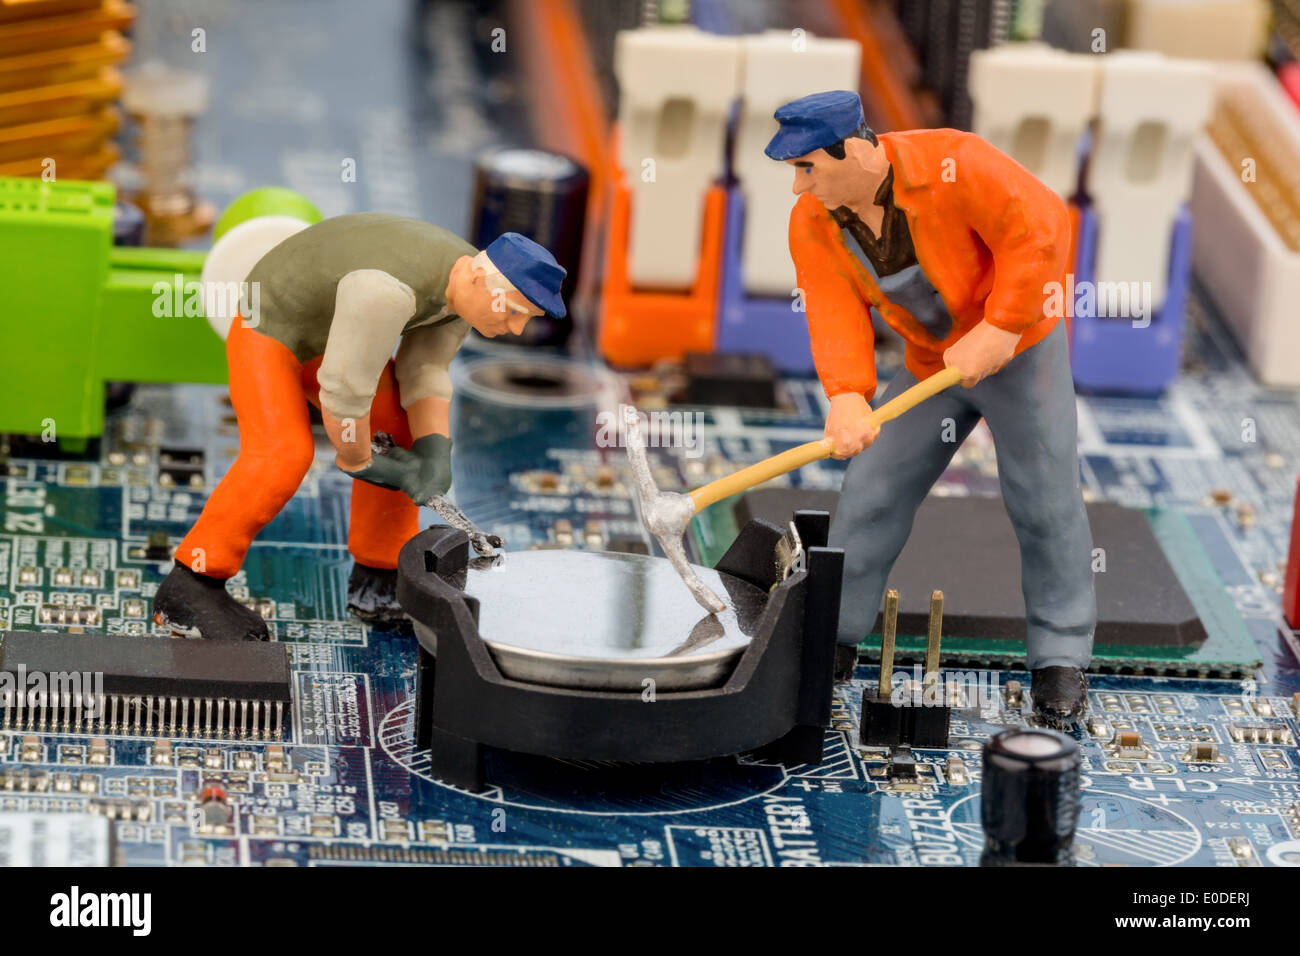 A worker repairs the board of a computer. Symbolic photo for data security, Ein Arbeiter repariert die Platine eines Computers. Stock Photo